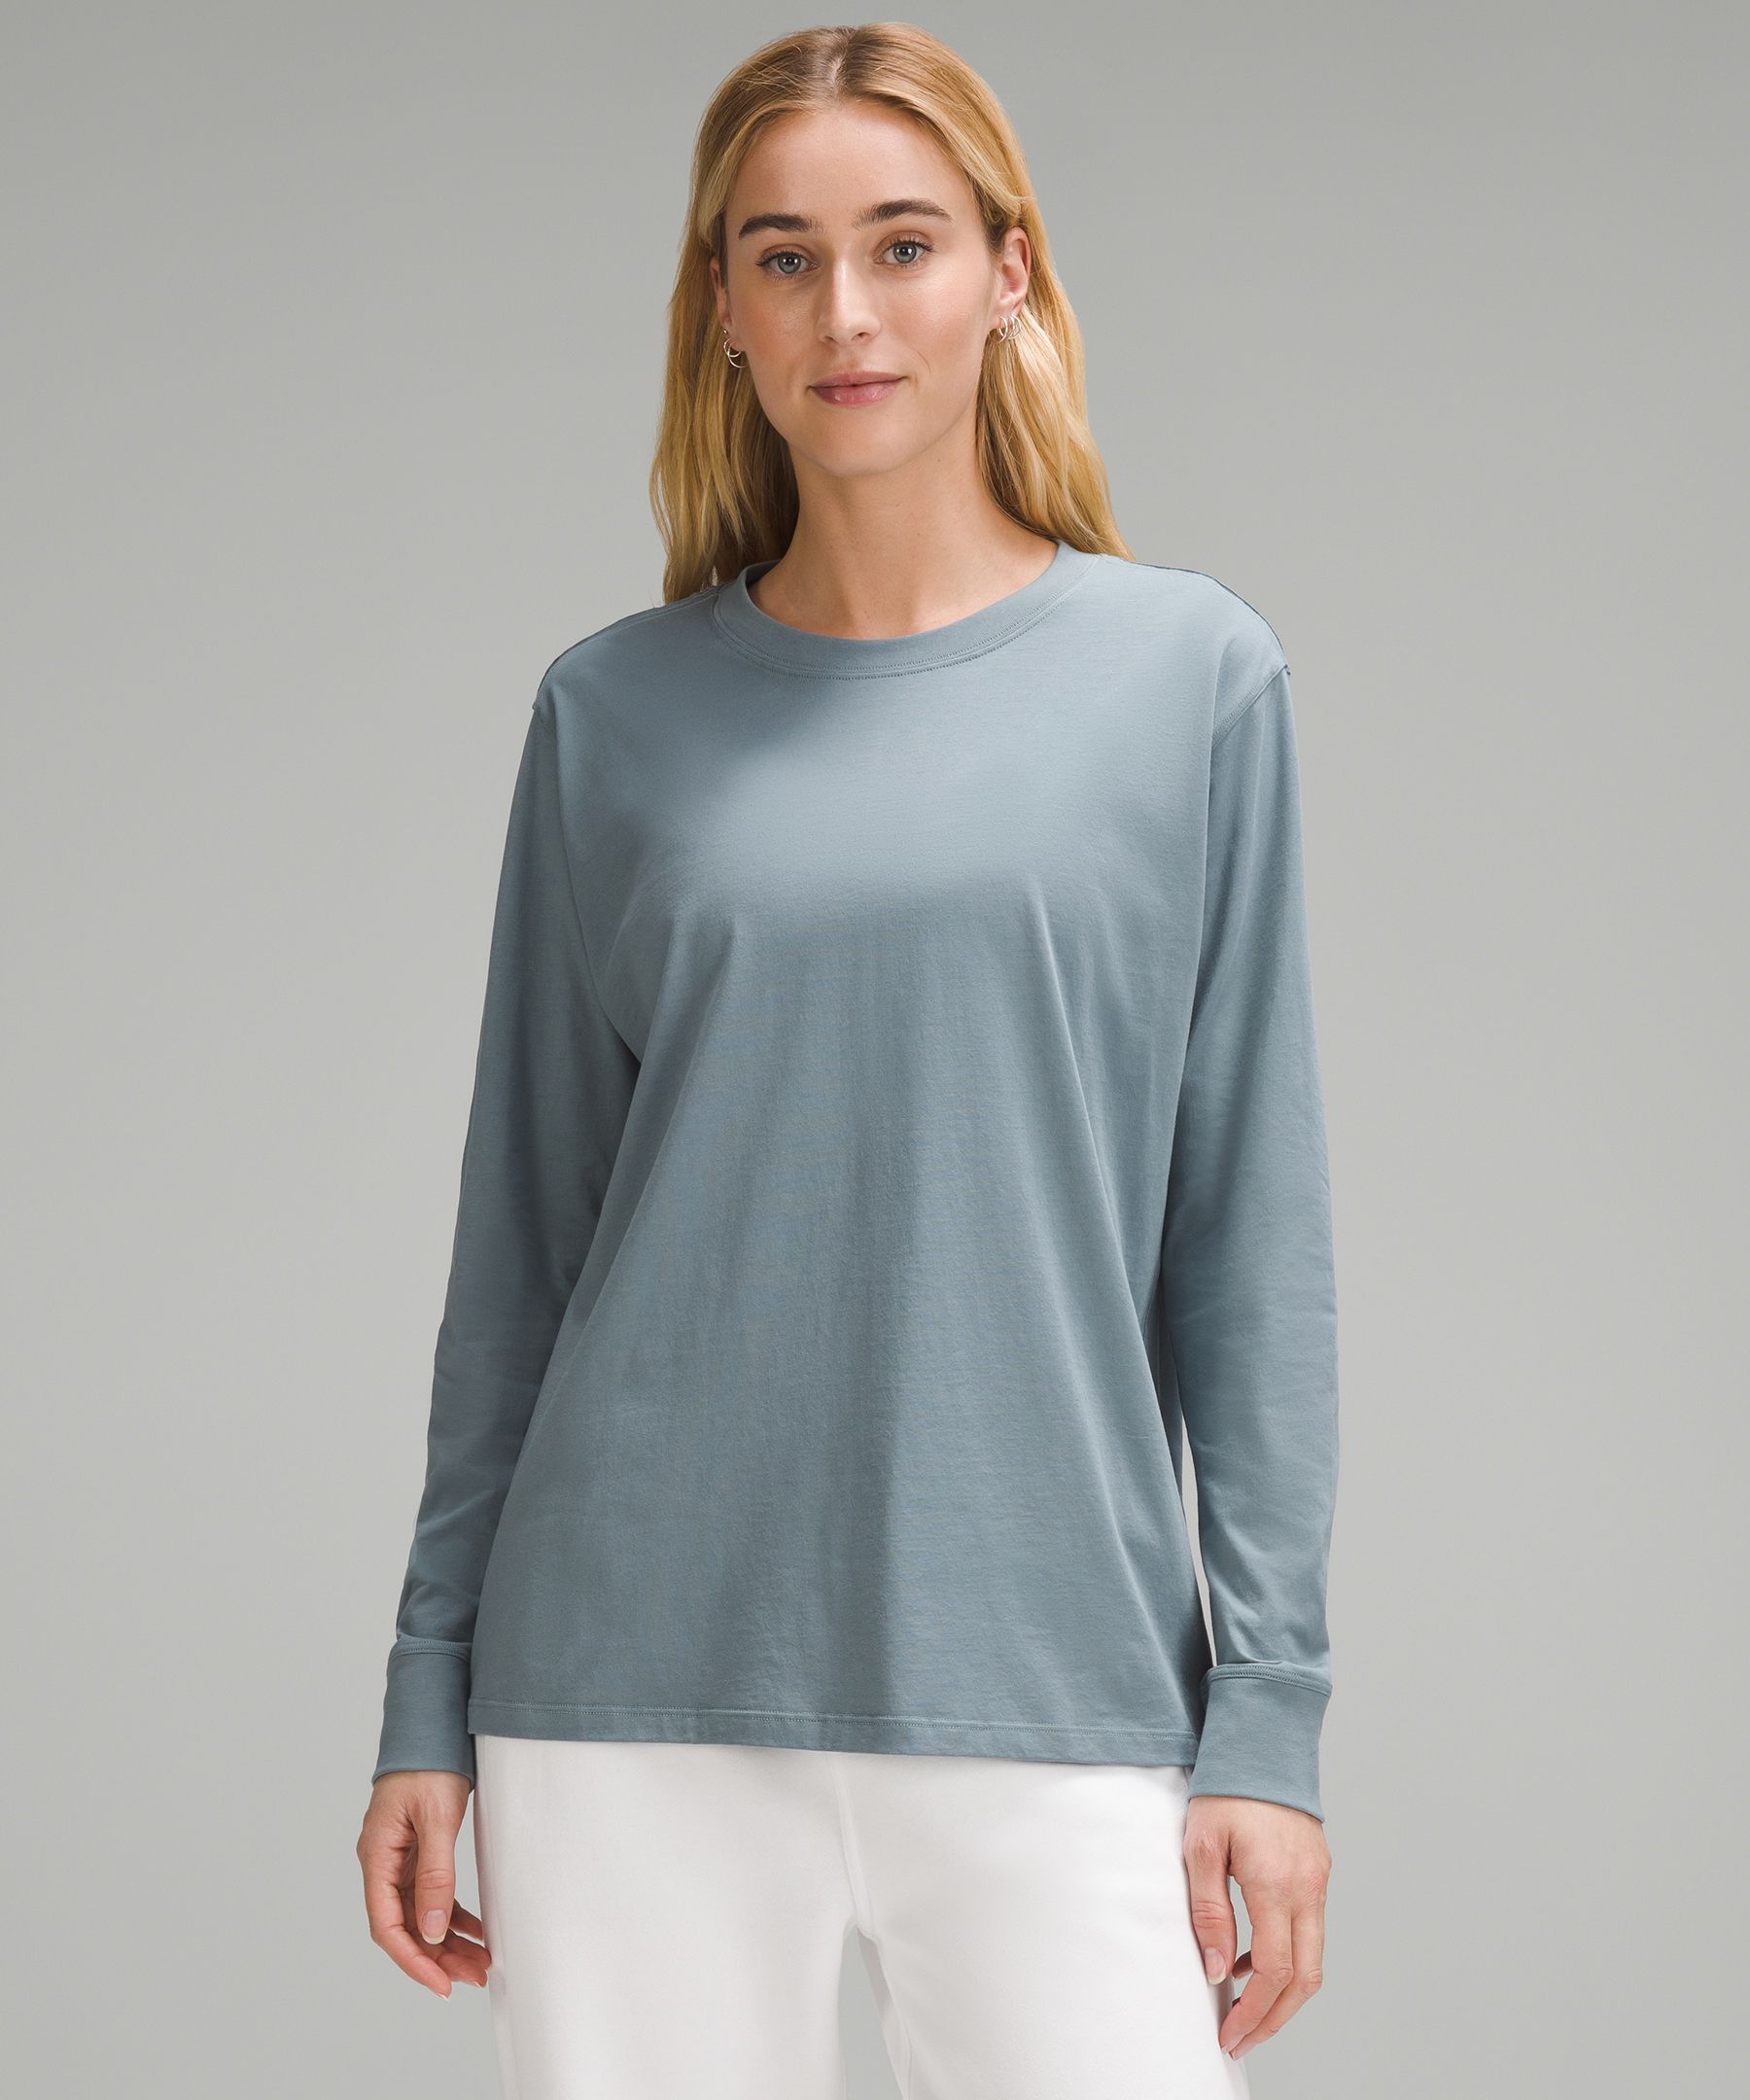 lululemon athletica All Yours Heavyweight Long-sleeve Shirt - Color Blue -  Size 12